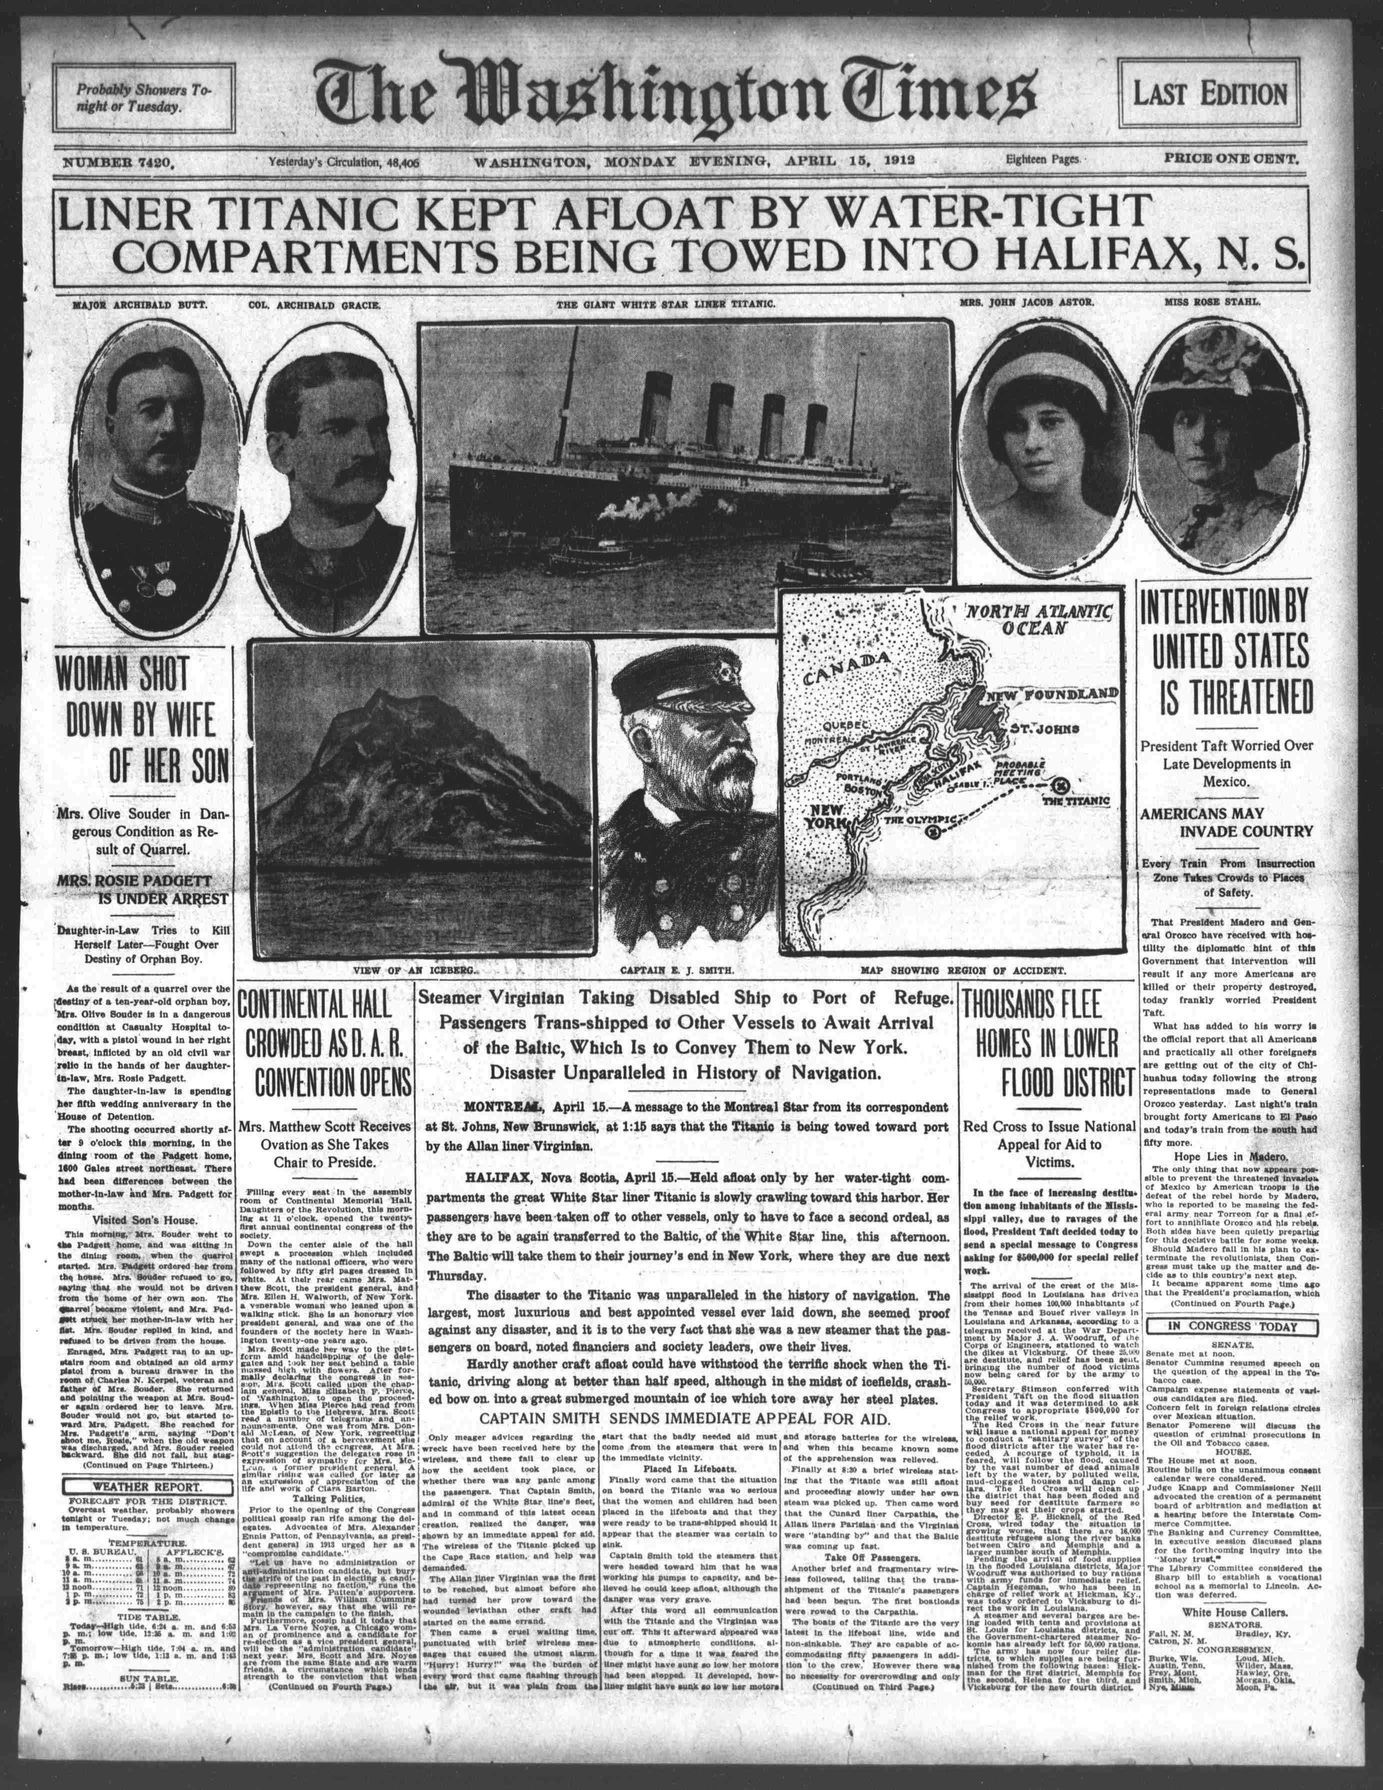 Titanic Newspaper Front Page 1912-04-15 The Washington Times, April 15, 1912, LAST EDITION, Page 1